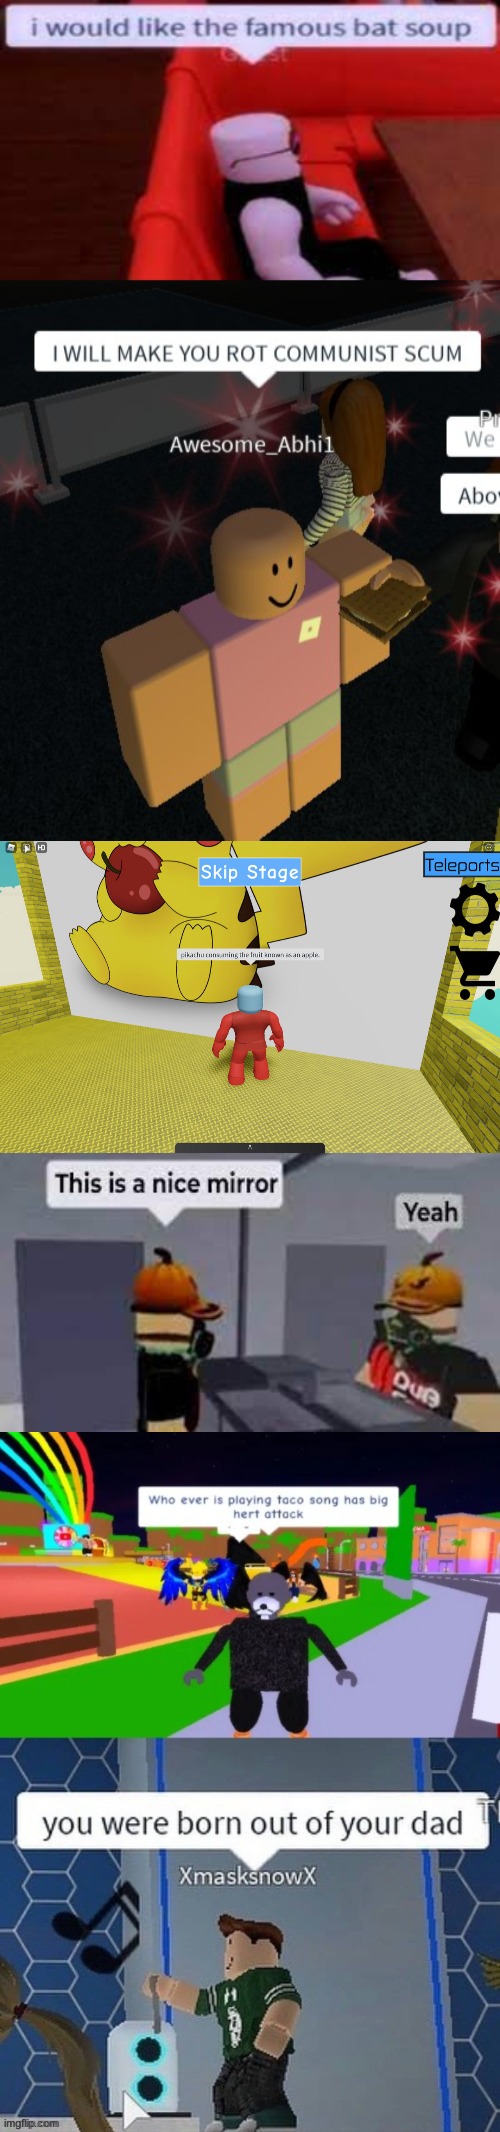 Just some stuff I found | image tagged in roblox,cursed roblox image,roblox meme,cursed,tags | made w/ Imgflip meme maker